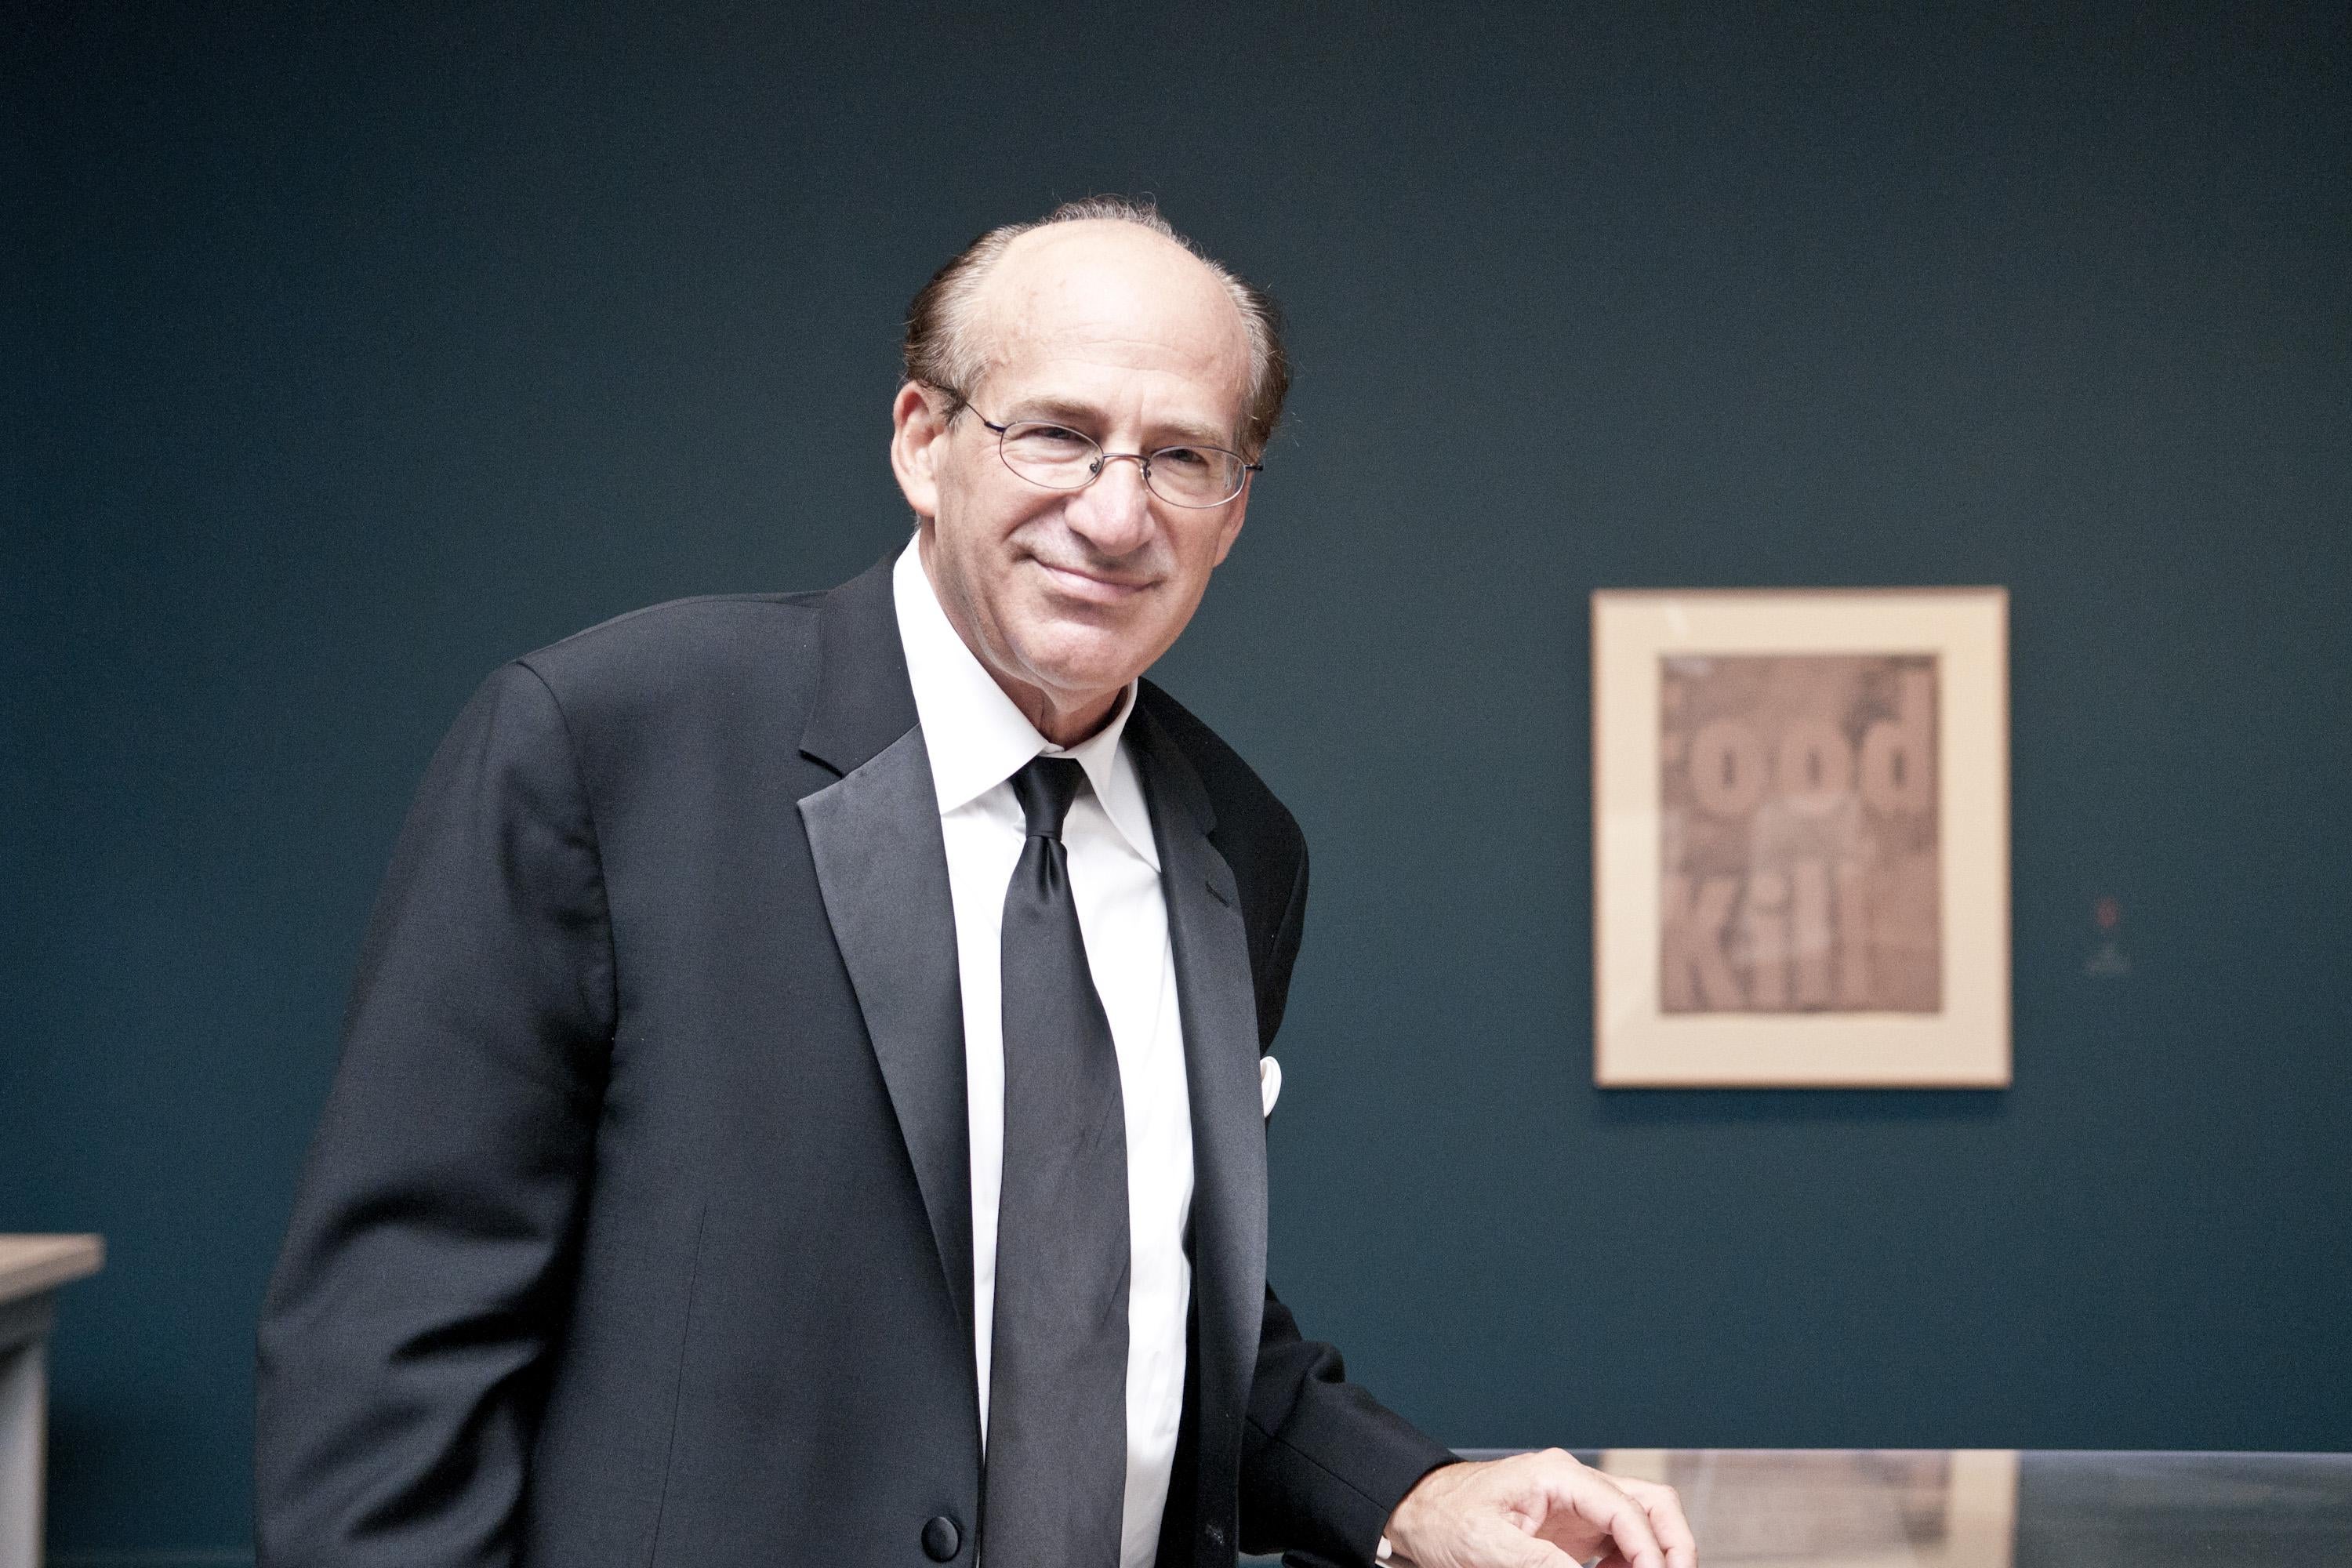 Barry Levine poses for a photo at the National Gallery of Art on October 5, 2011 in Washington, D.C.